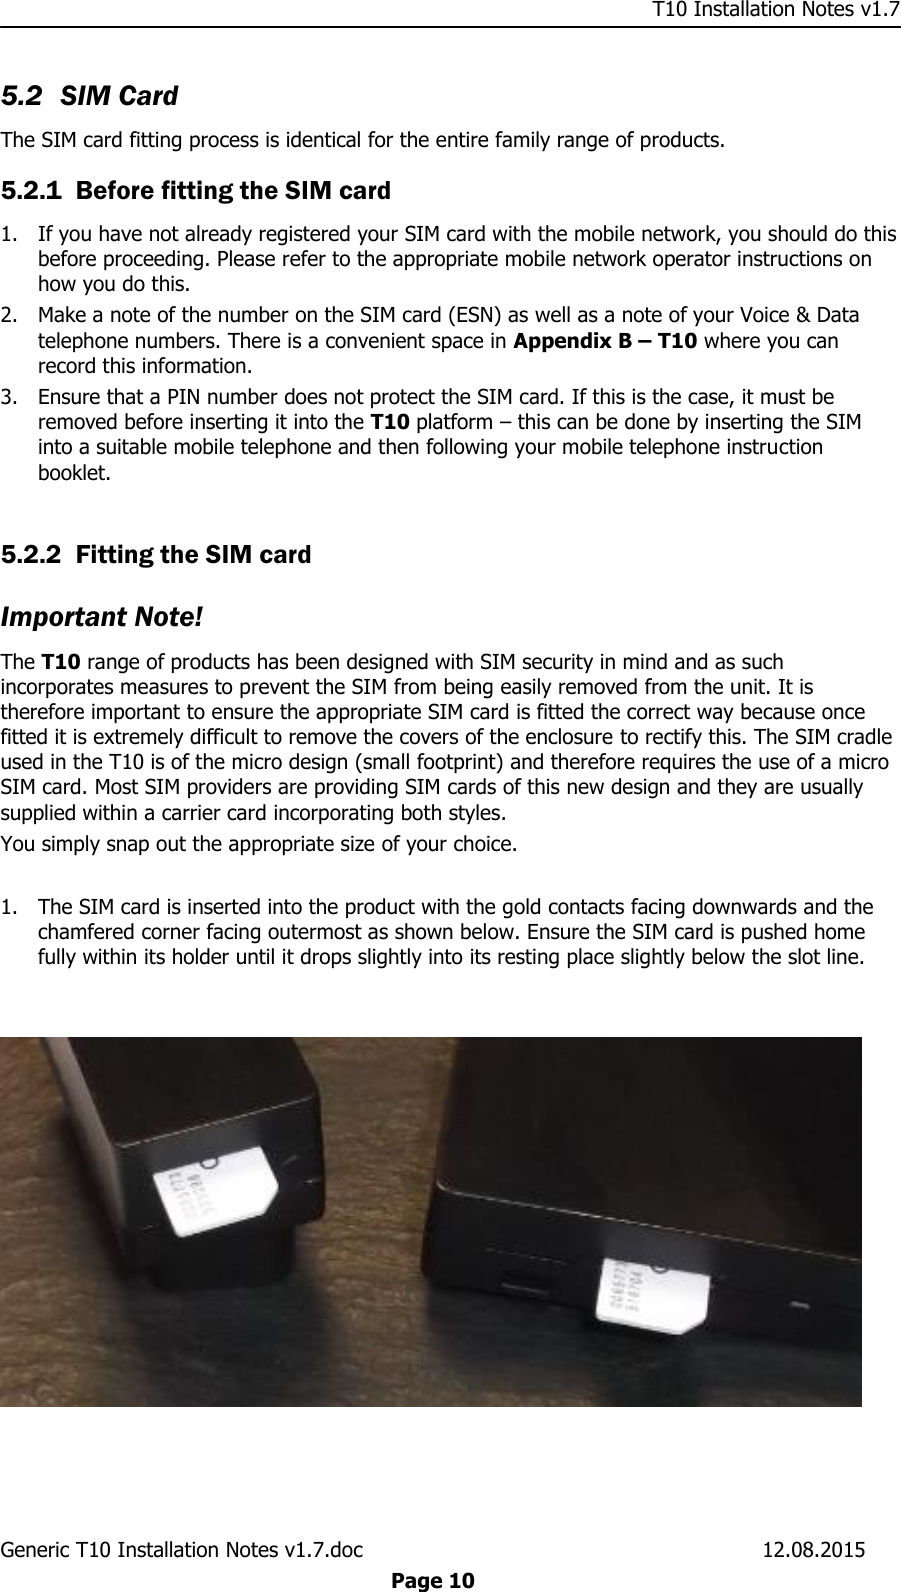     T10 Installation Notes v1.7 Generic T10 Installation Notes v1.7.doc    12.08.2015  Page 10 5.2 SIM Card The SIM card fitting process is identical for the entire family range of products. 5.2.1 Before fitting the SIM card 1. If you have not already registered your SIM card with the mobile network, you should do this before proceeding. Please refer to the appropriate mobile network operator instructions on how you do this. 2. Make a note of the number on the SIM card (ESN) as well as a note of your Voice &amp; Data telephone numbers. There is a convenient space in Appendix B – T10 where you can record this information.  3. Ensure that a PIN number does not protect the SIM card. If this is the case, it must be removed before inserting it into the T10 platform – this can be done by inserting the SIM into a suitable mobile telephone and then following your mobile telephone instruction booklet.  5.2.2 Fitting the SIM card Important Note! The T10 range of products has been designed with SIM security in mind and as such incorporates measures to prevent the SIM from being easily removed from the unit. It is therefore important to ensure the appropriate SIM card is fitted the correct way because once fitted it is extremely difficult to remove the covers of the enclosure to rectify this. The SIM cradle used in the T10 is of the micro design (small footprint) and therefore requires the use of a micro SIM card. Most SIM providers are providing SIM cards of this new design and they are usually supplied within a carrier card incorporating both styles.  You simply snap out the appropriate size of your choice.   1. The SIM card is inserted into the product with the gold contacts facing downwards and the chamfered corner facing outermost as shown below. Ensure the SIM card is pushed home fully within its holder until it drops slightly into its resting place slightly below the slot line.    